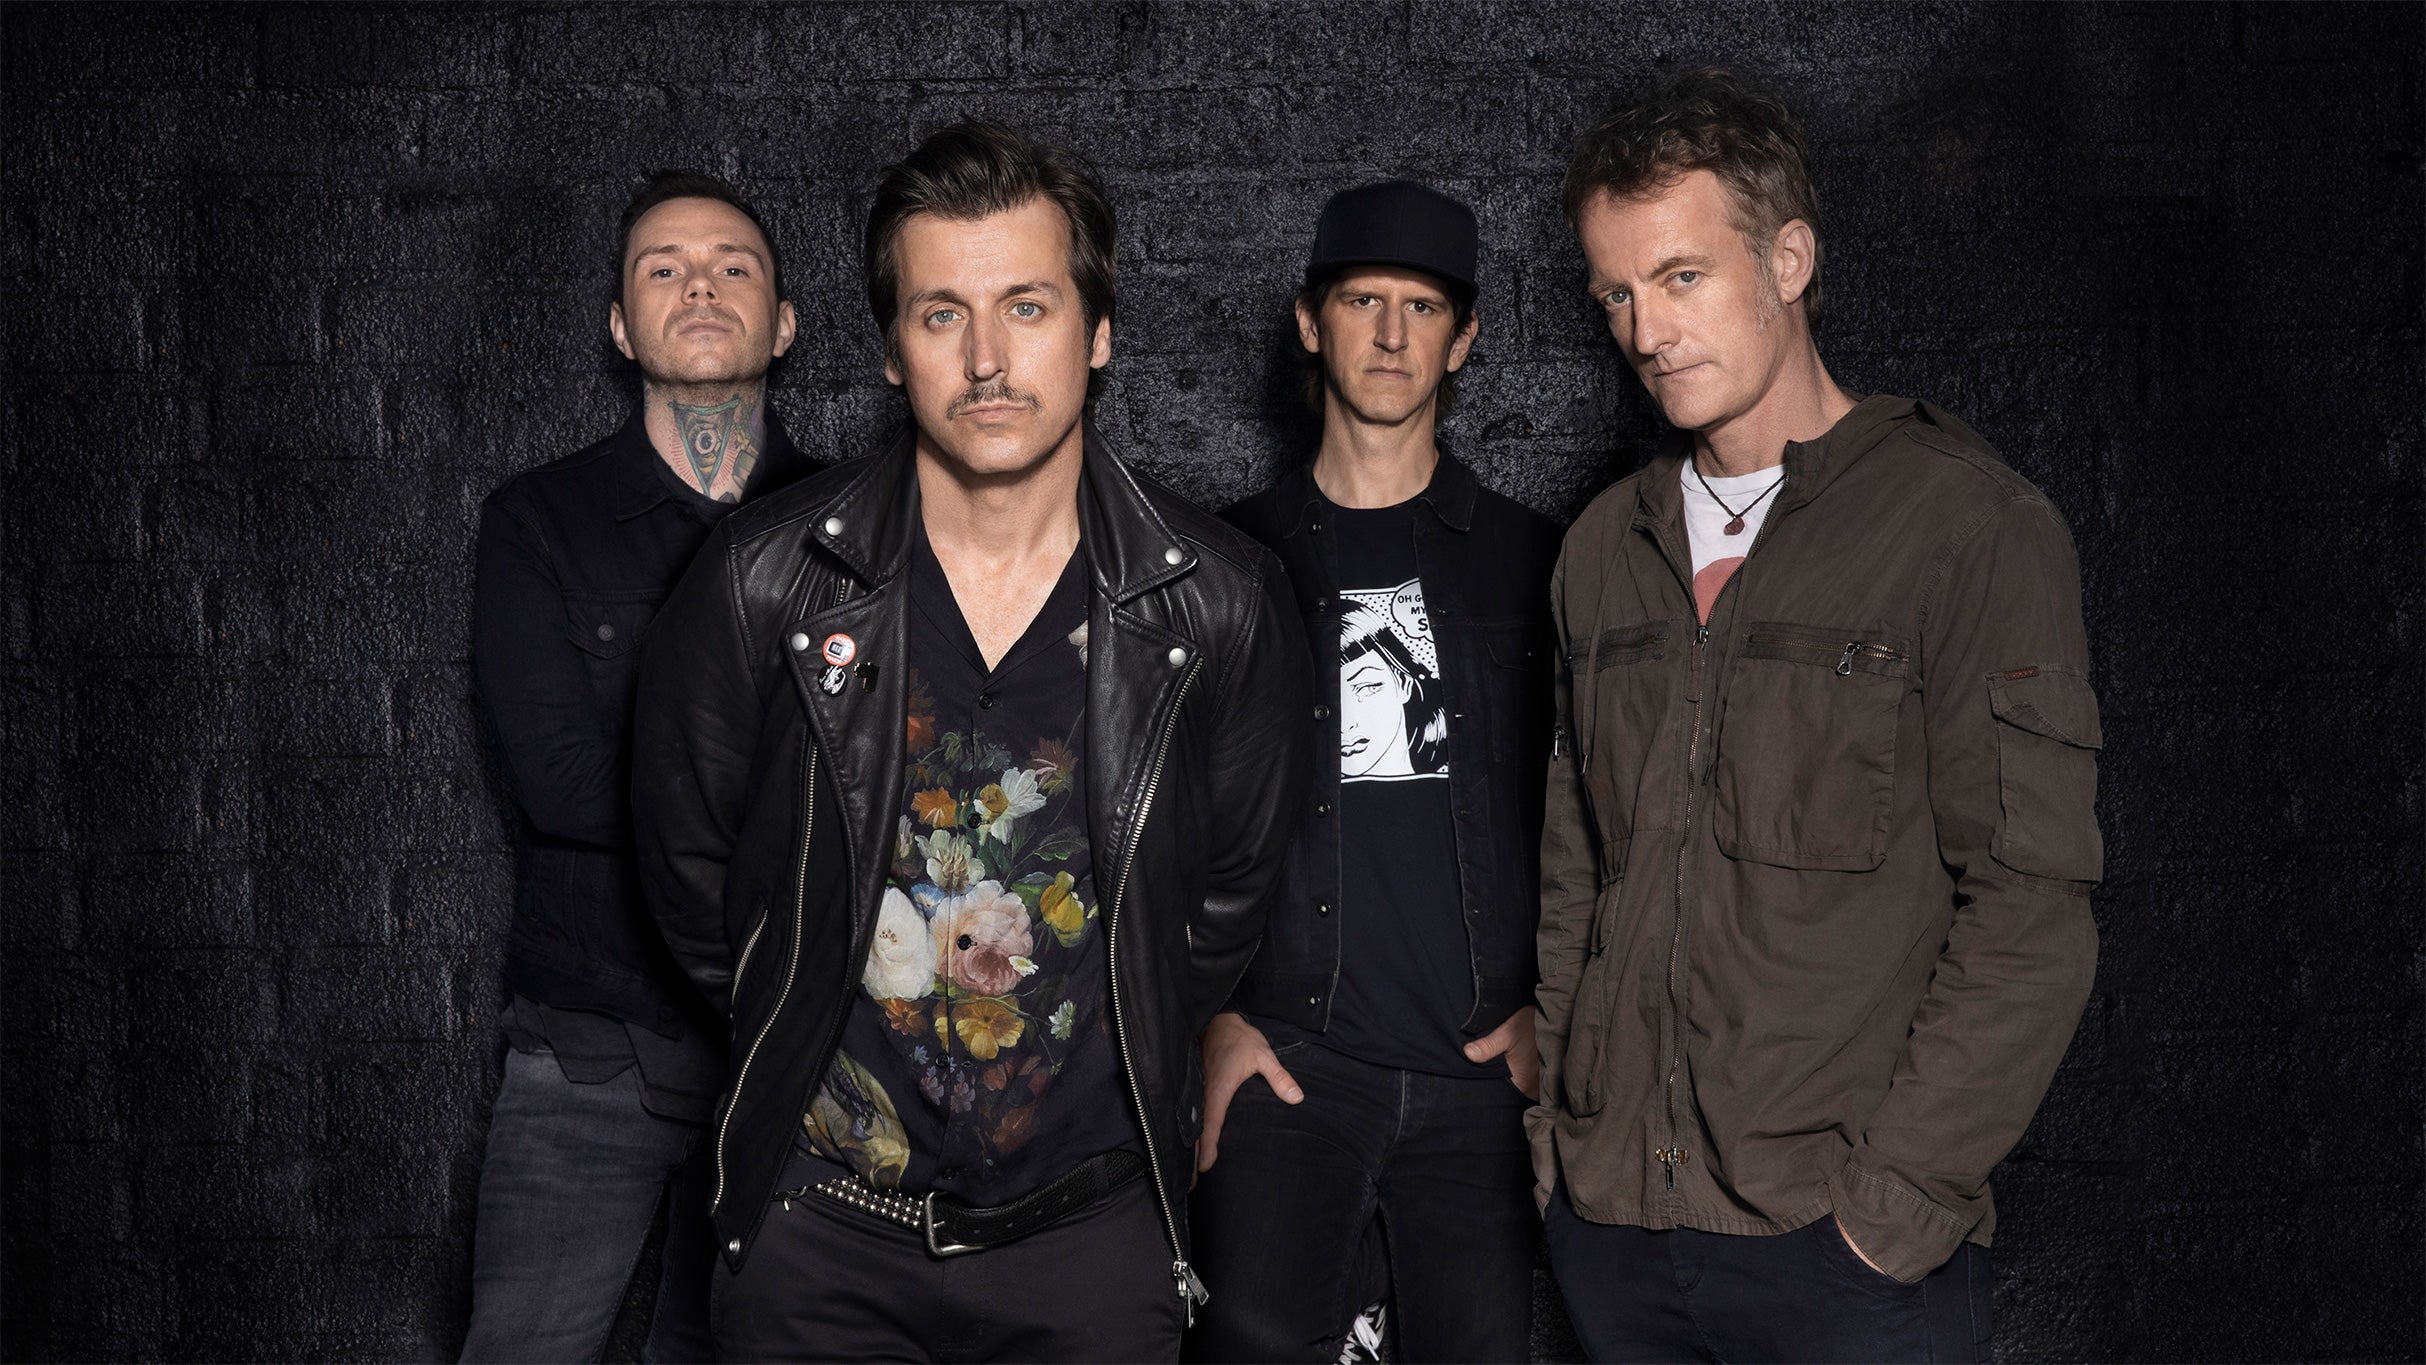 Our Lady Peace in Windsor event information